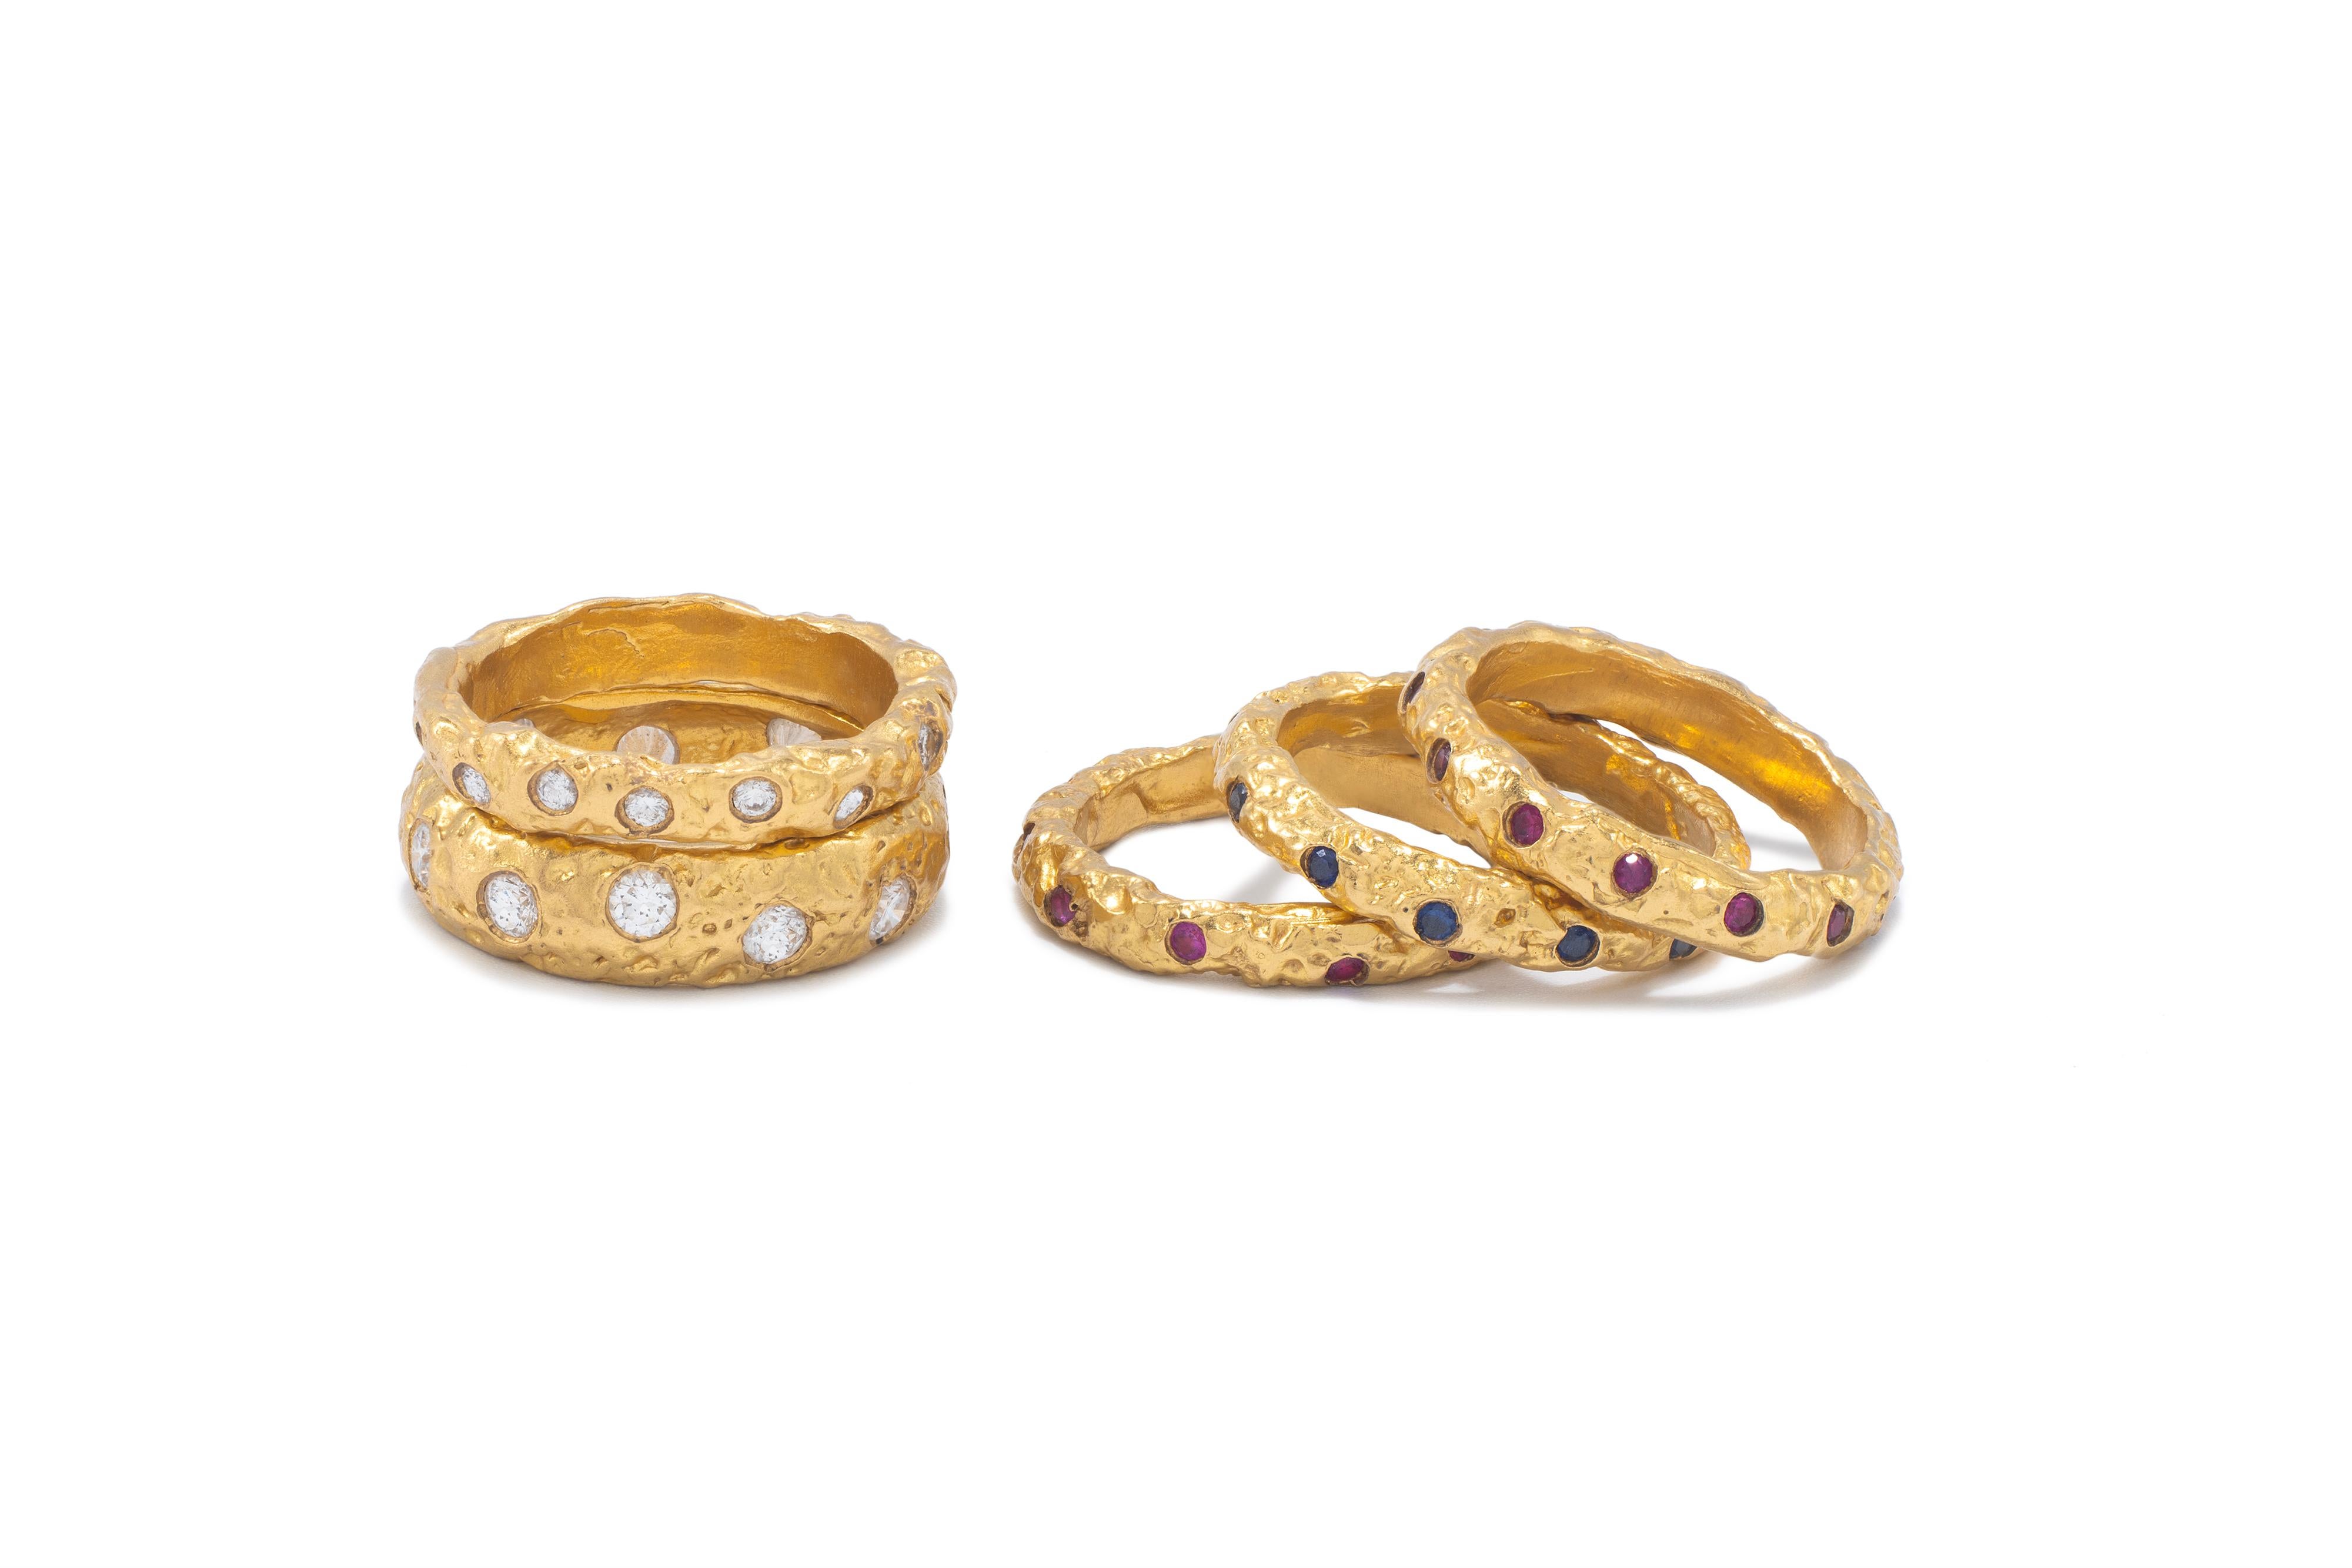 22k Gold Chunky Foil Stacking Rings with Pink Sapphires, by Tagili In New Condition For Sale In New York, NY